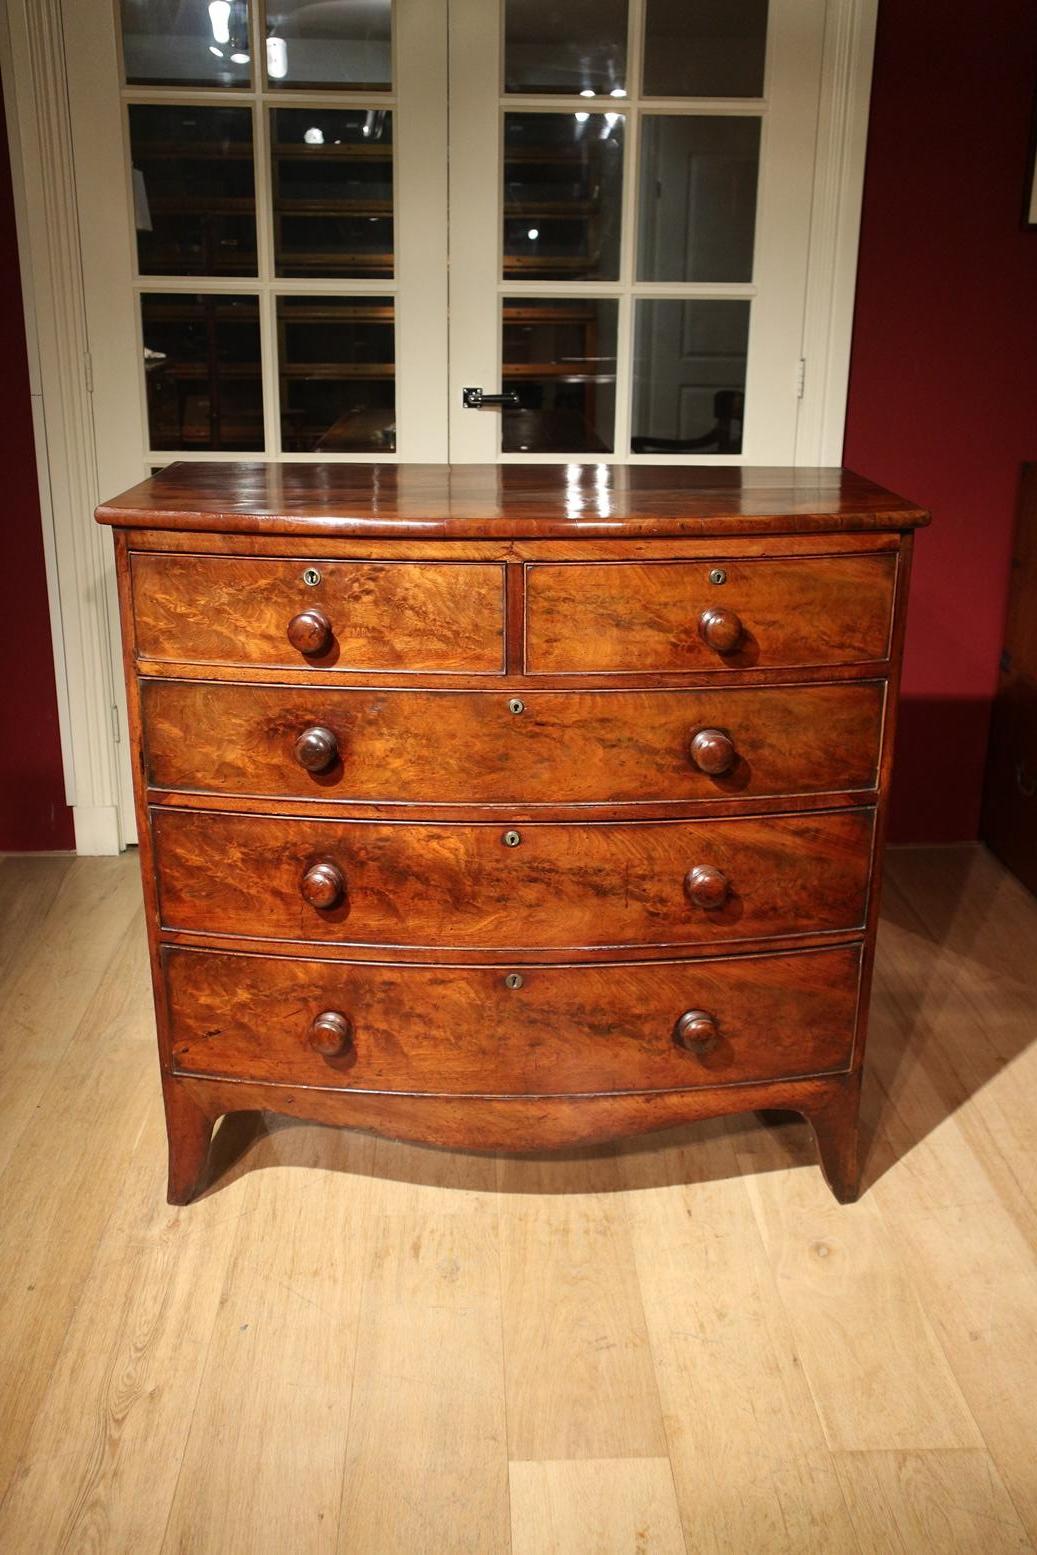 Beautiful antique mahogany bow front chest of drawers in completely original condition. The mahogany has a beautiful drawing and a superb colour.

Origin: England

Period: Approx. 1840-1860

Size: 105cm x 53cm x H 104cm.